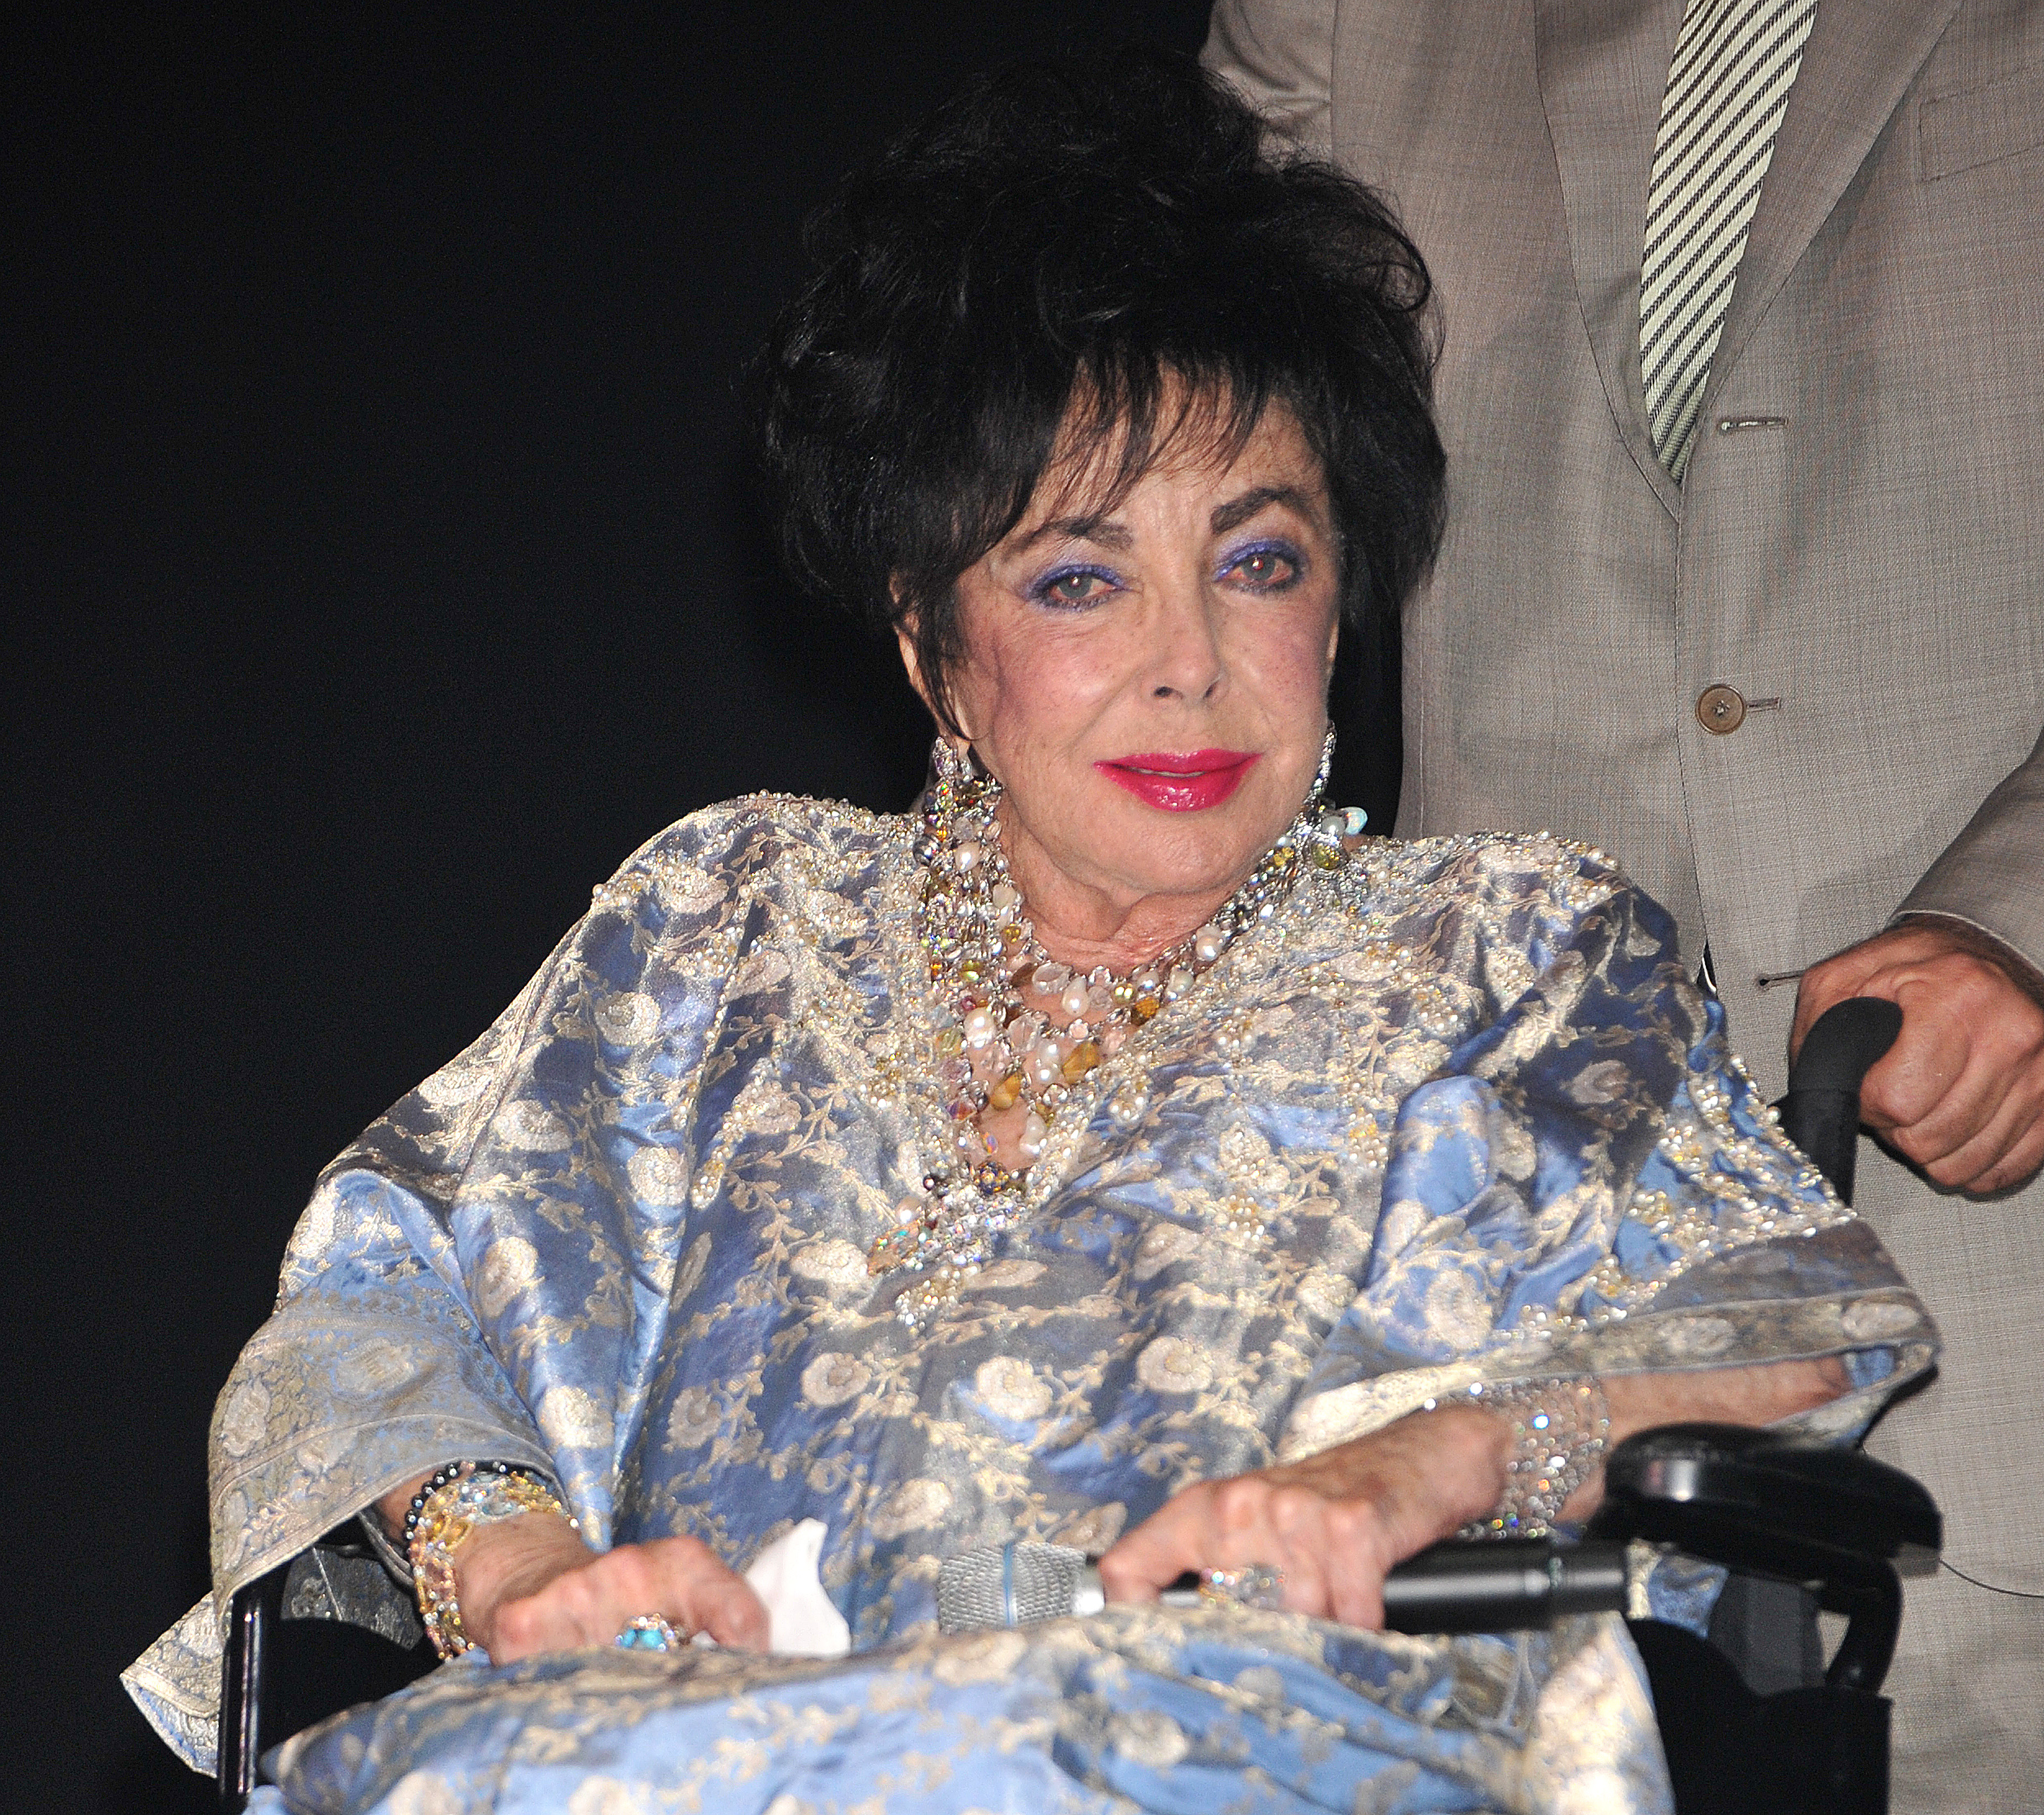 Elizabeth Taylor on stage at Macy's Passport Fashion Show to raise crucial funds and awareness for HIV/AIDS at Santa Monica Airport, on September 24, 2009. | Source: Getty Images